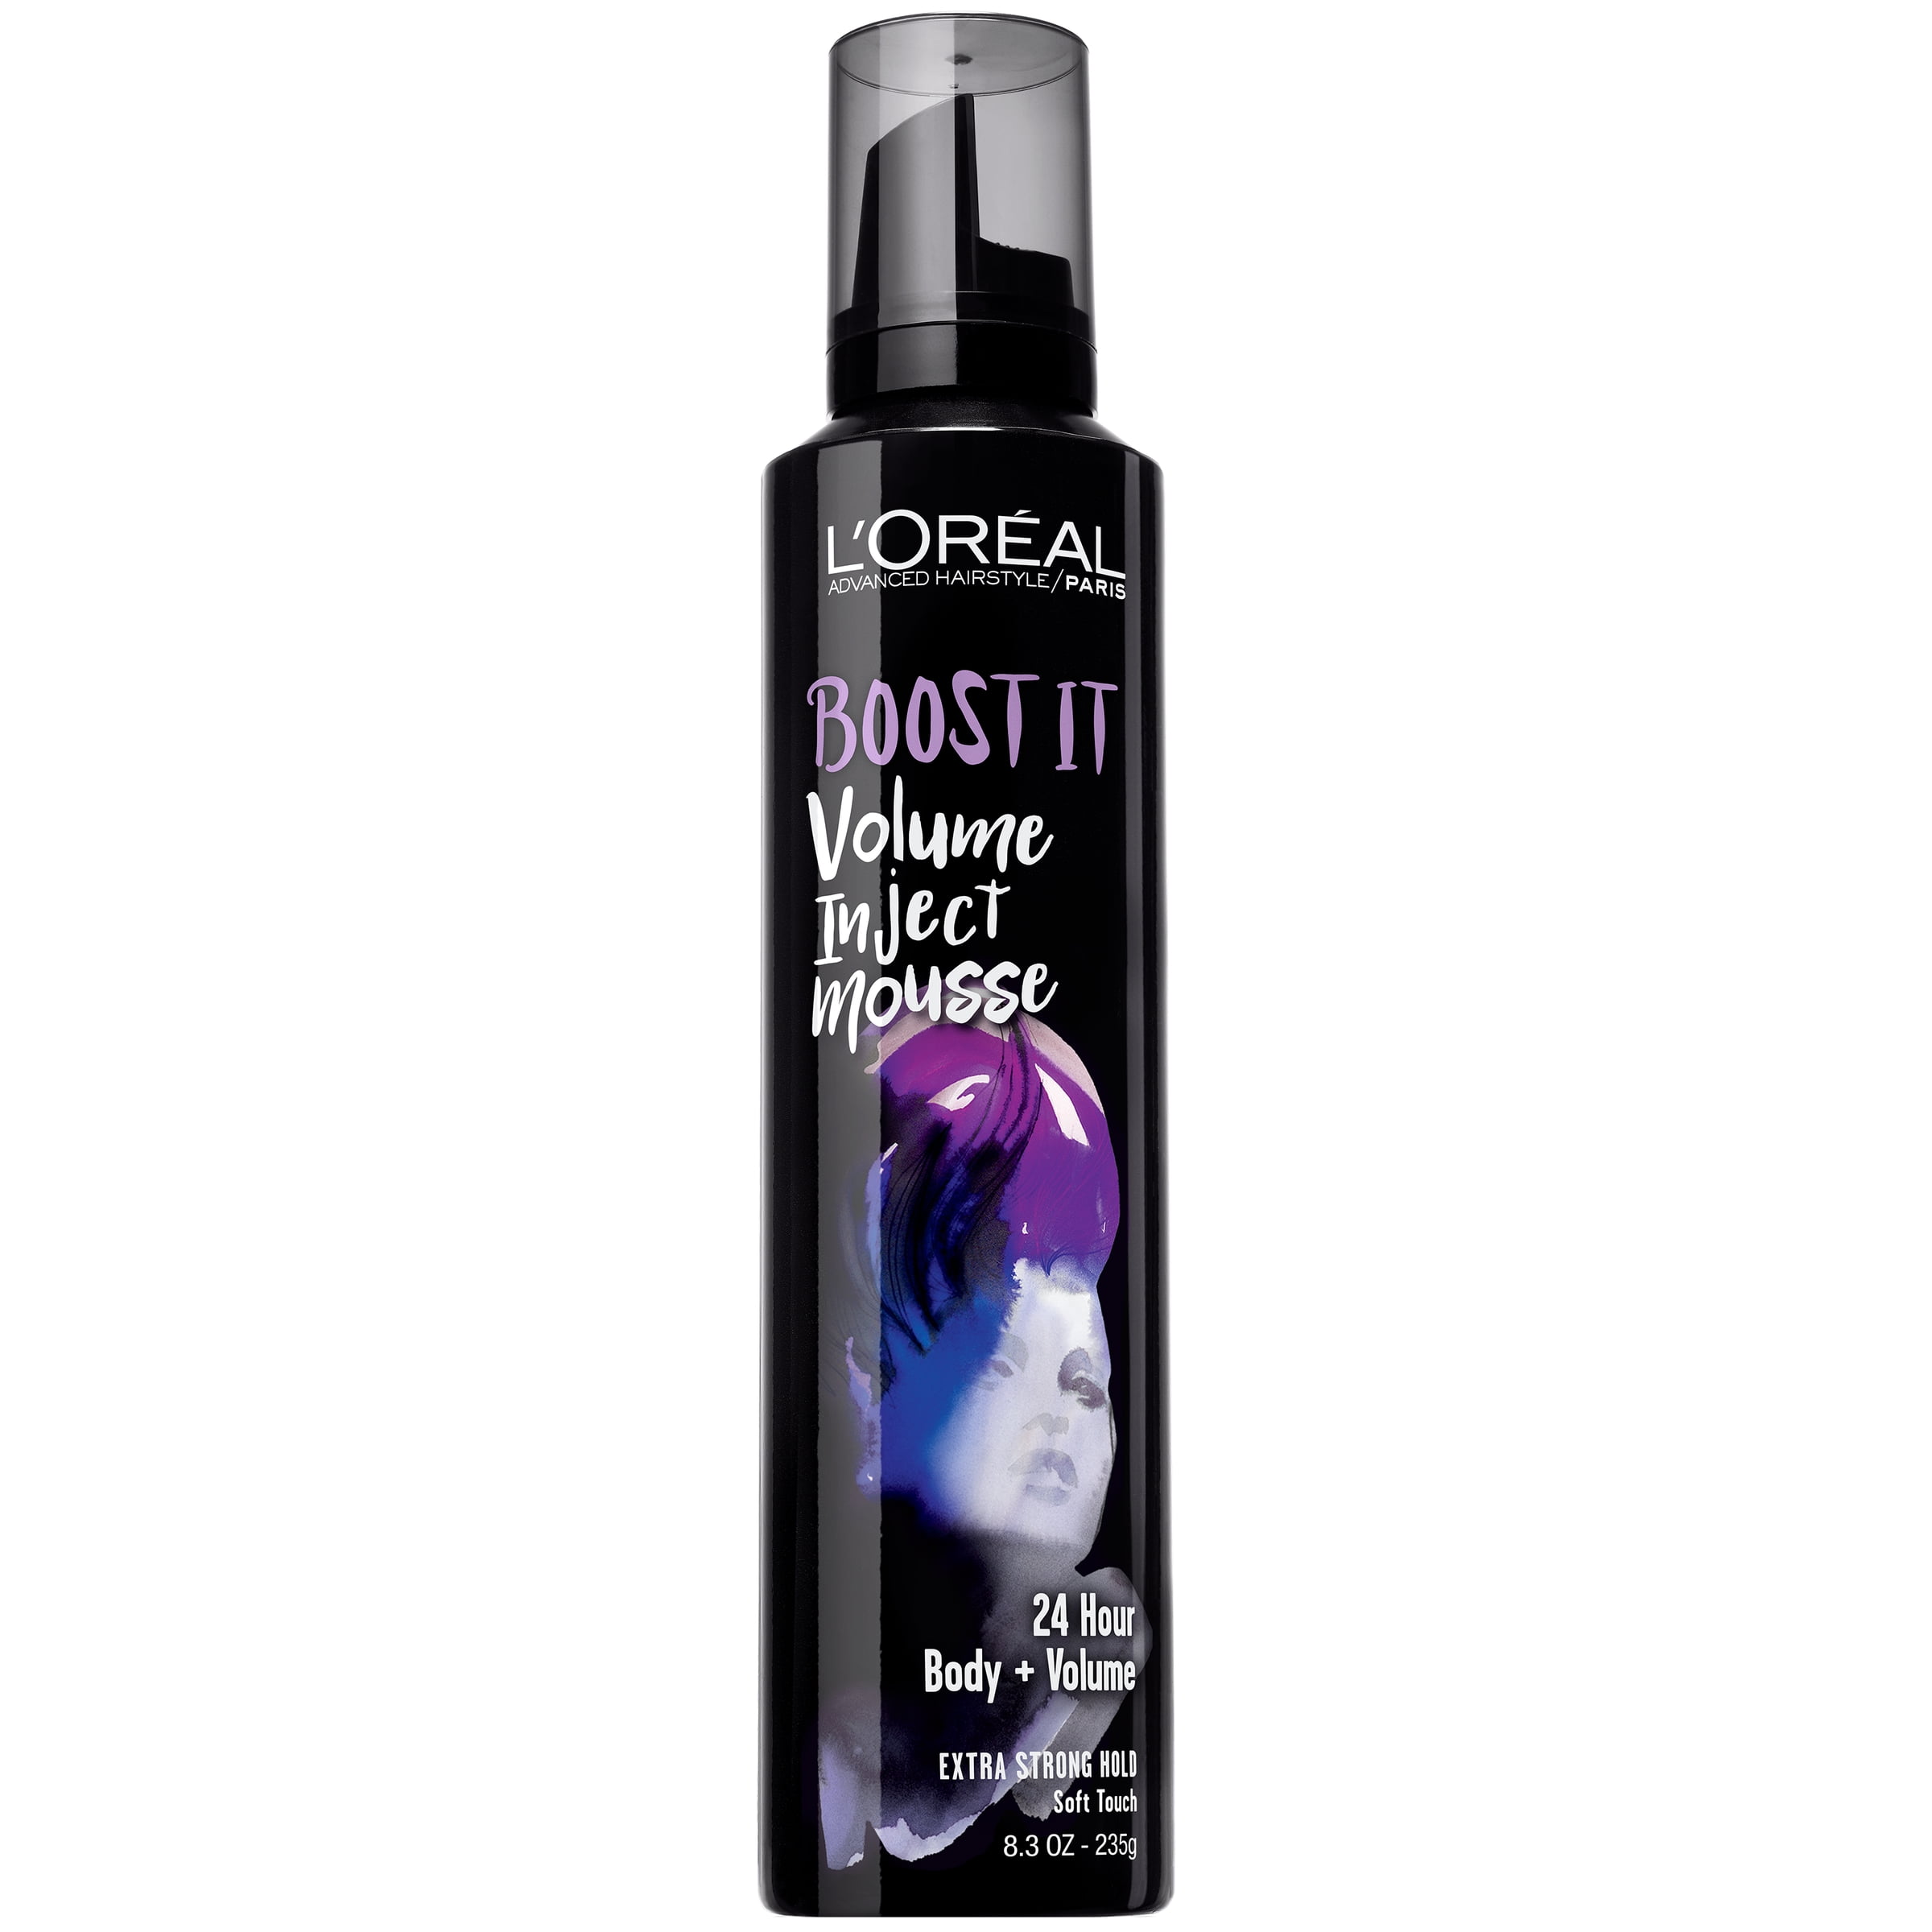 L'Oreal Paris Advanced Hairstyle Boost It 24 Hour Body + Volume Hair  Styling Mousse  oz 